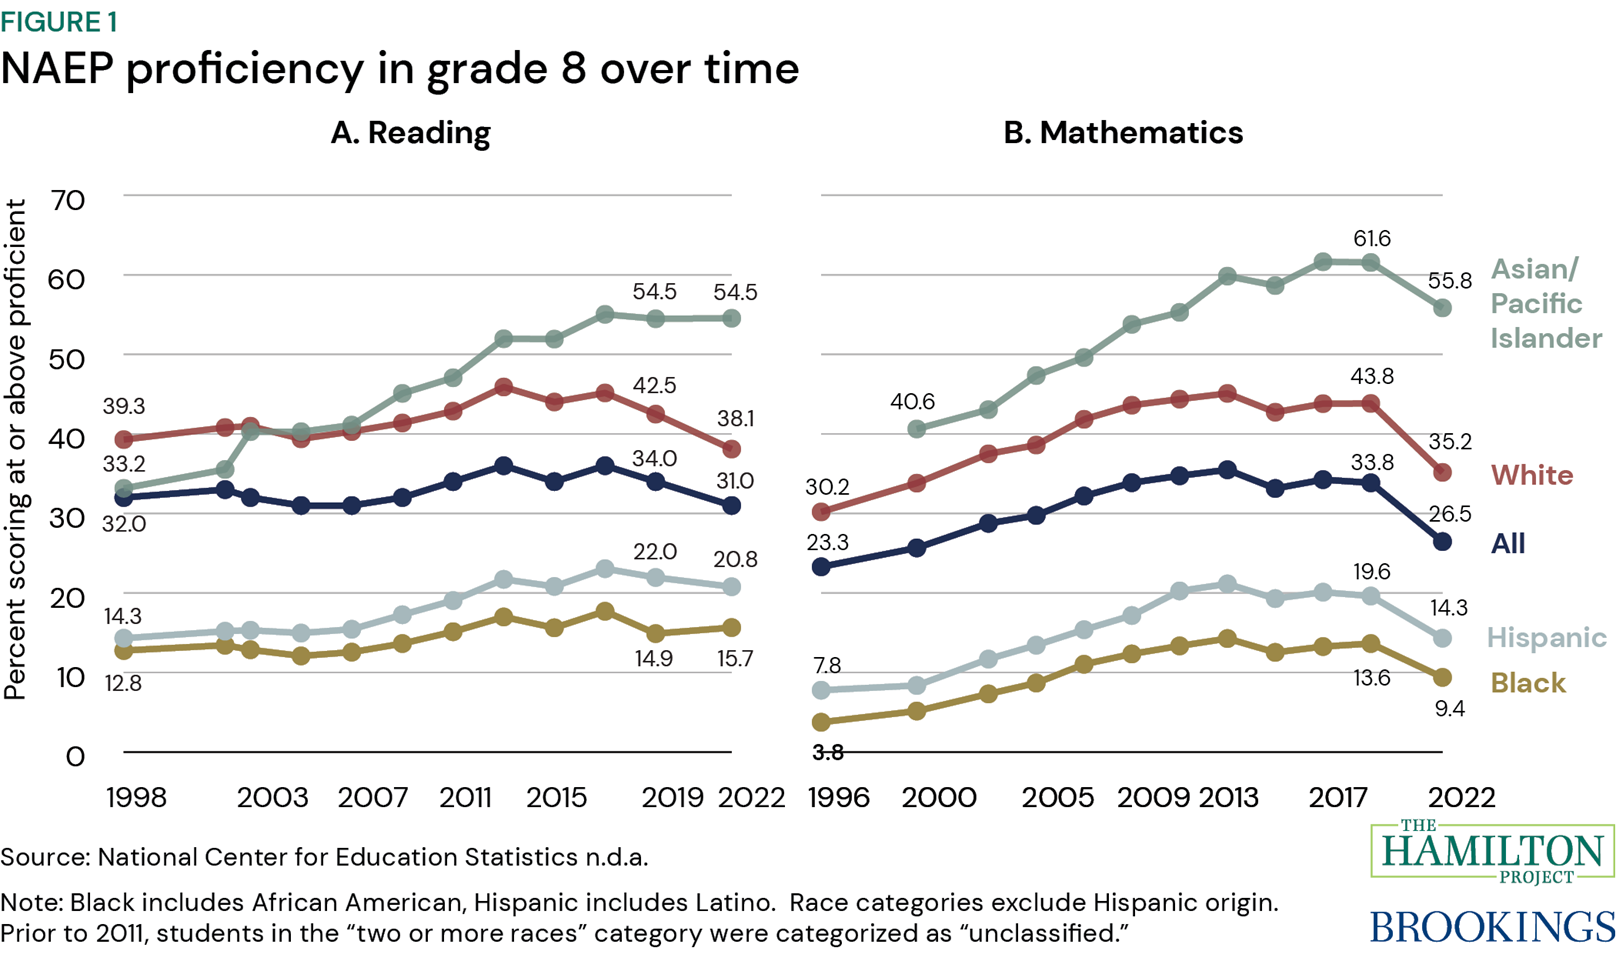 Figure 1: NAEP proficiency in grade 8 over time